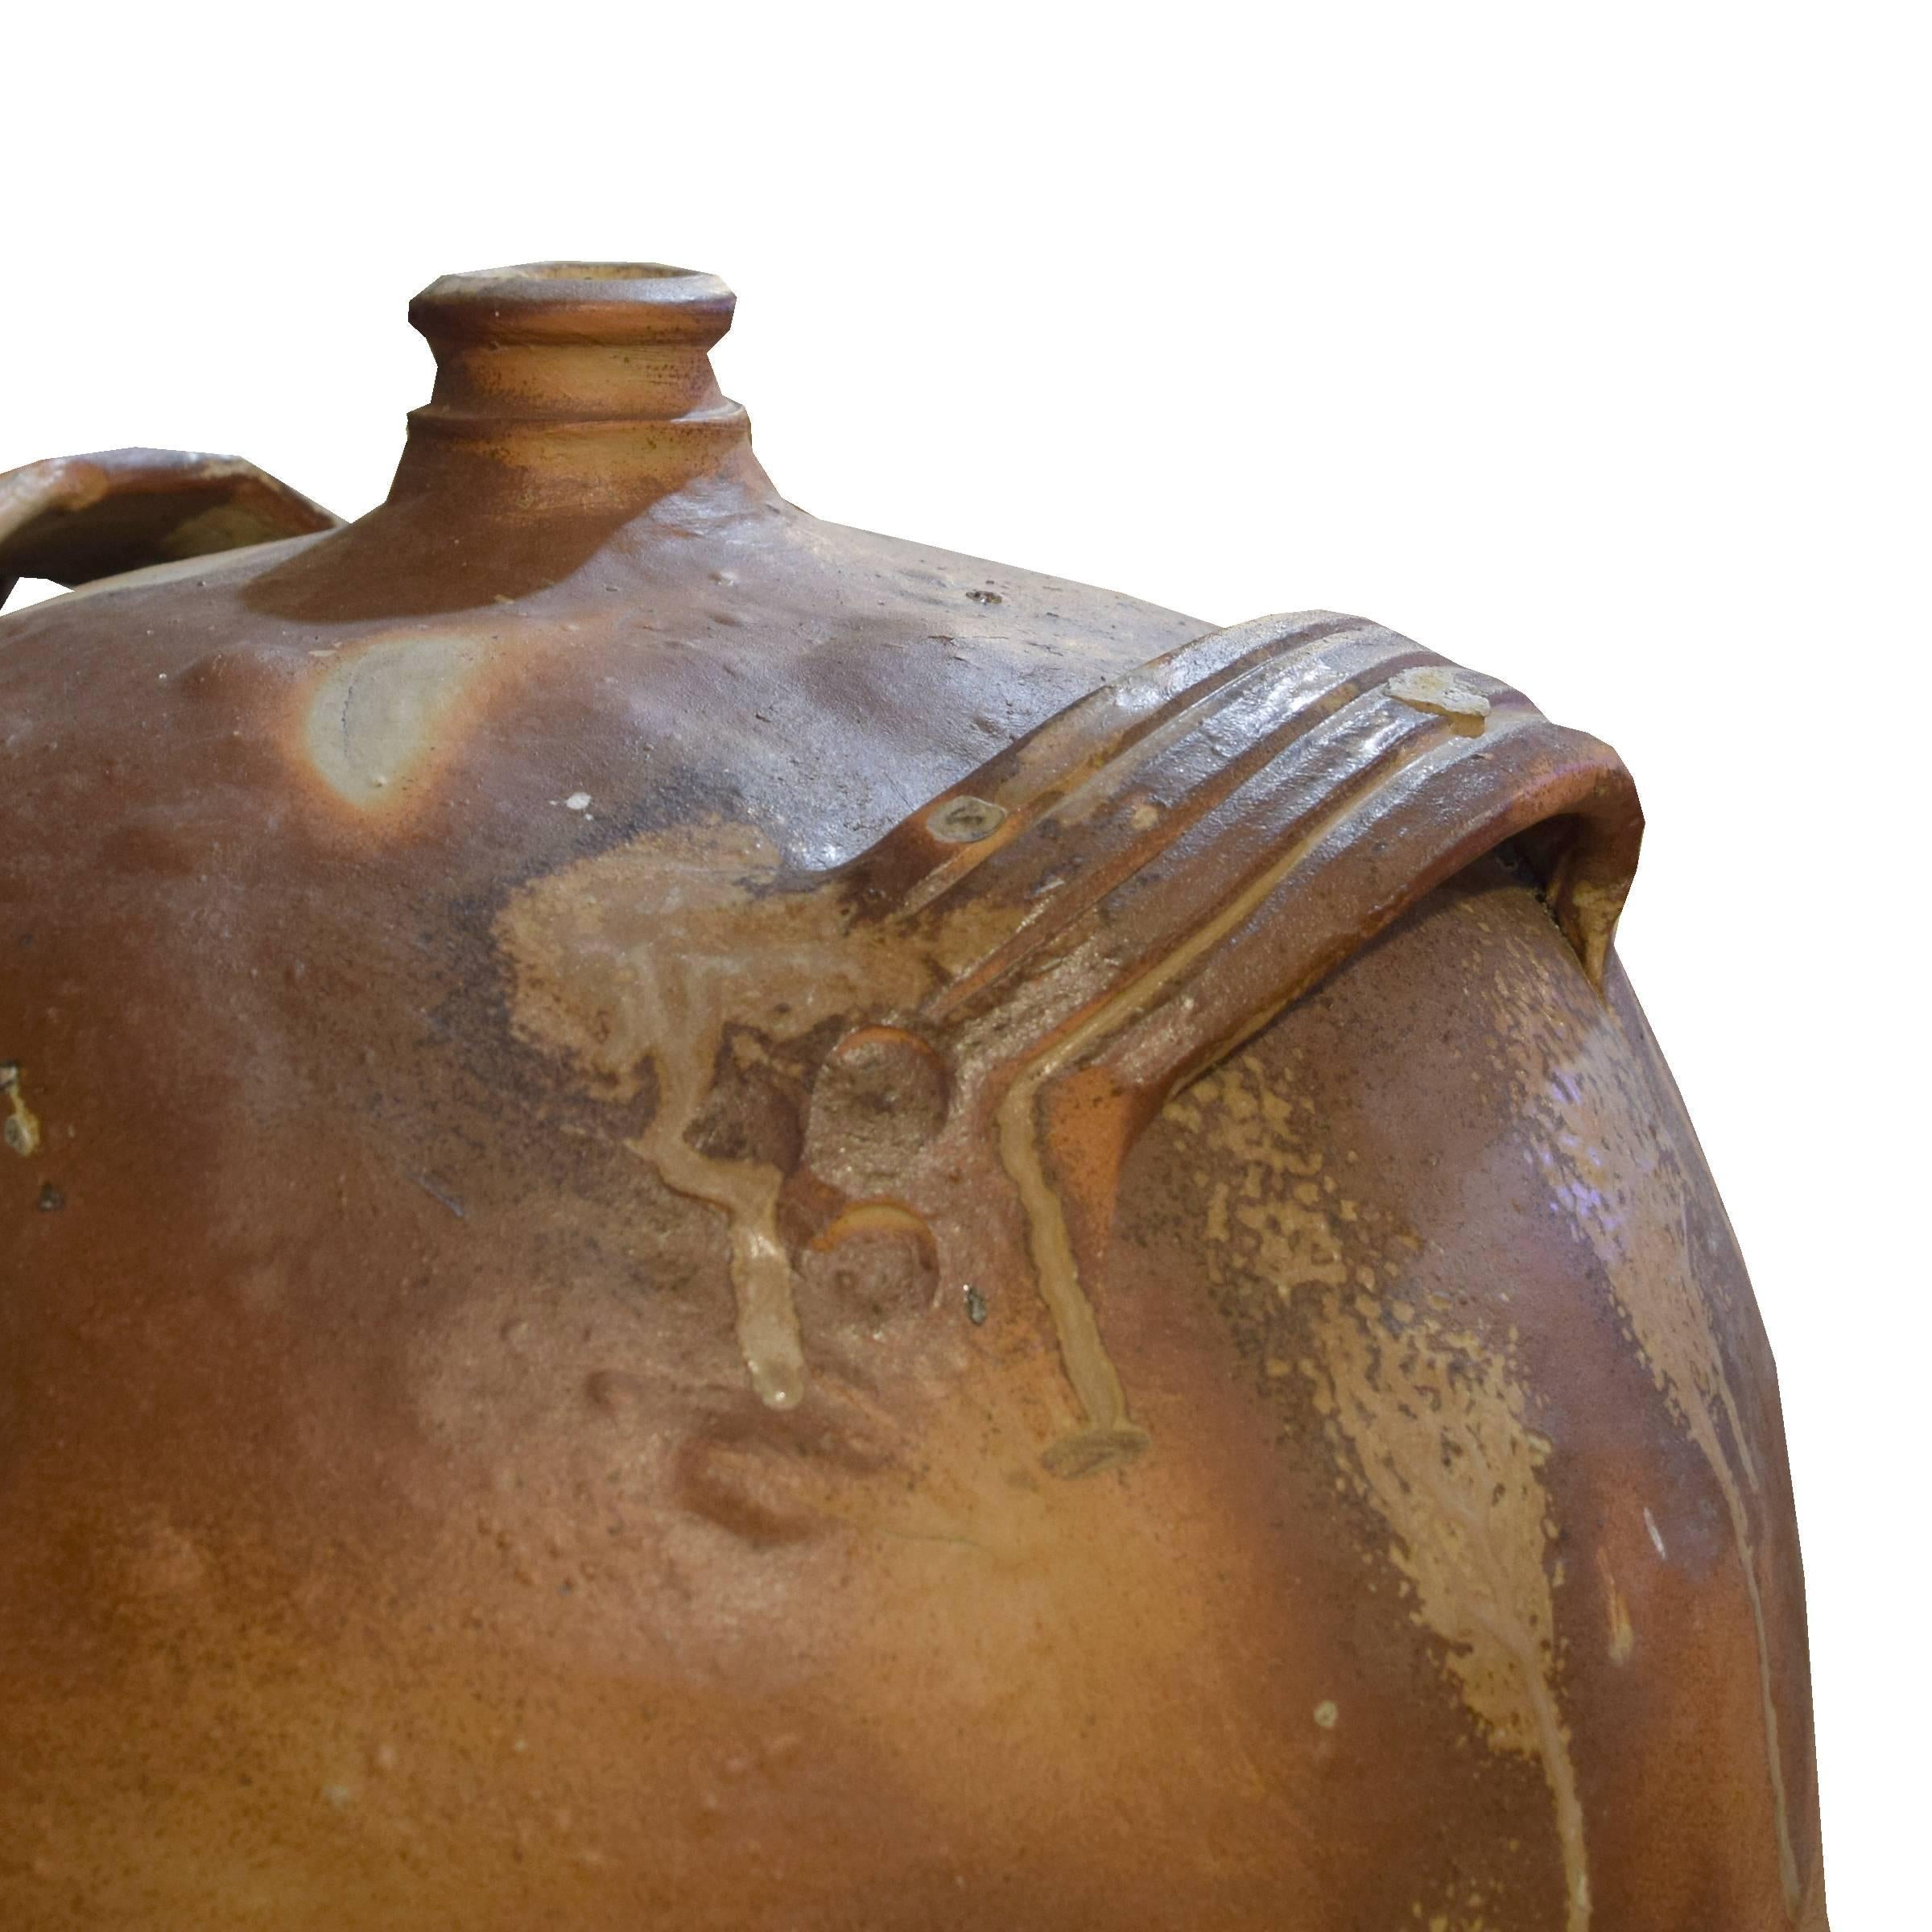 A large French hand-built ceramic wine vessel with handles, a spigot, and a cool glaze, circa 1900.
 